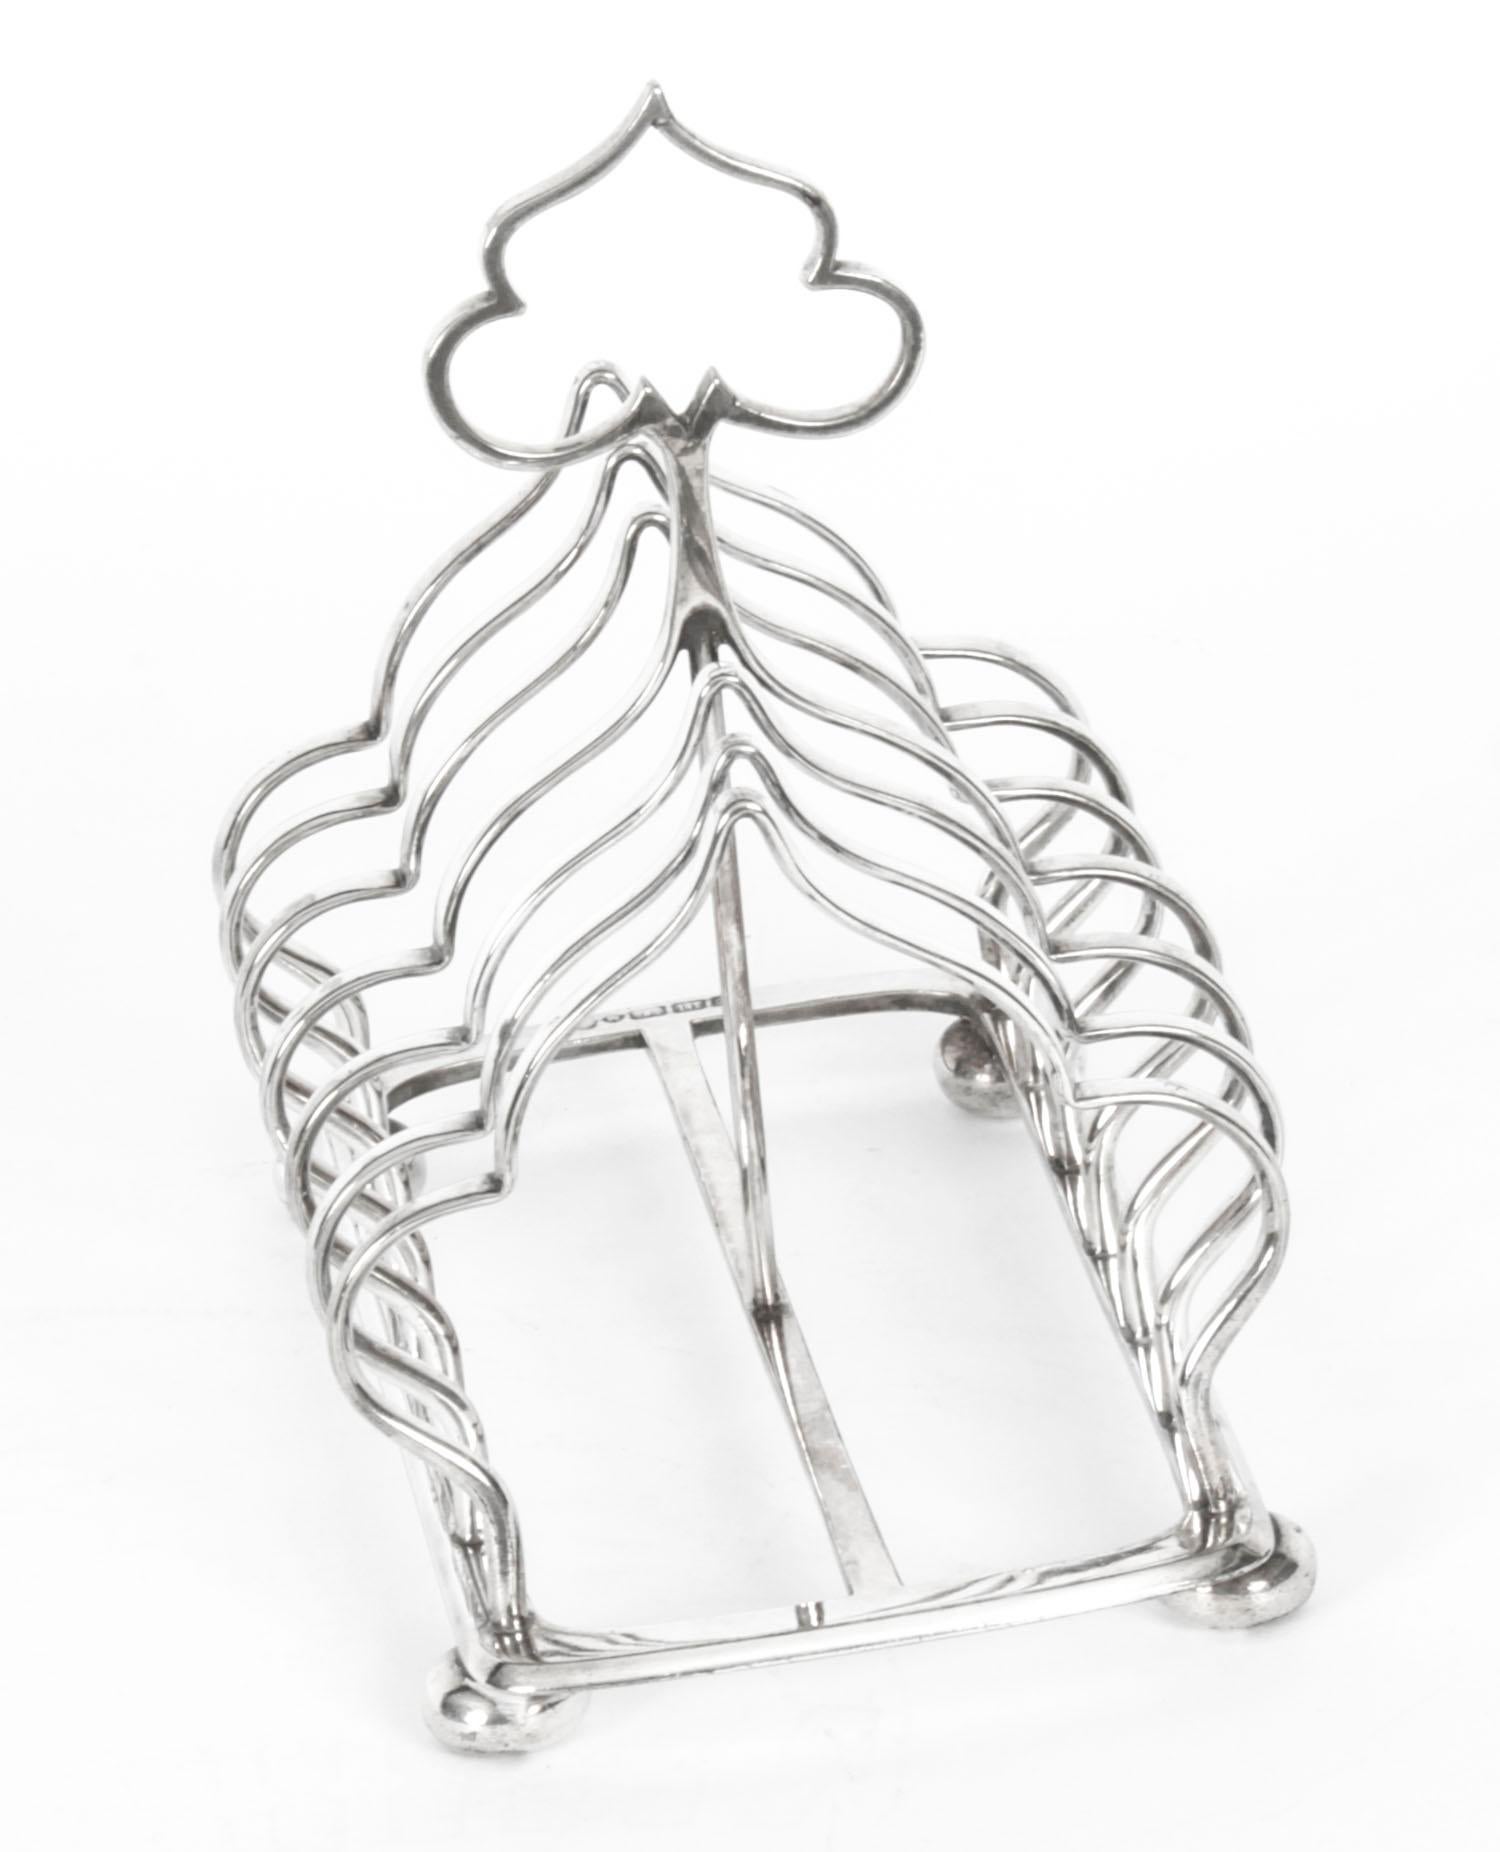 This is a lovely antique Victorian silver plated toast rack renowned silversmiths Elkington, Mason & Co Birmingham, Circa 1880 in date.

This seven-bar toast-rack is in the shape of the Ace of Spades, features shaped and graduated wire-work bars,